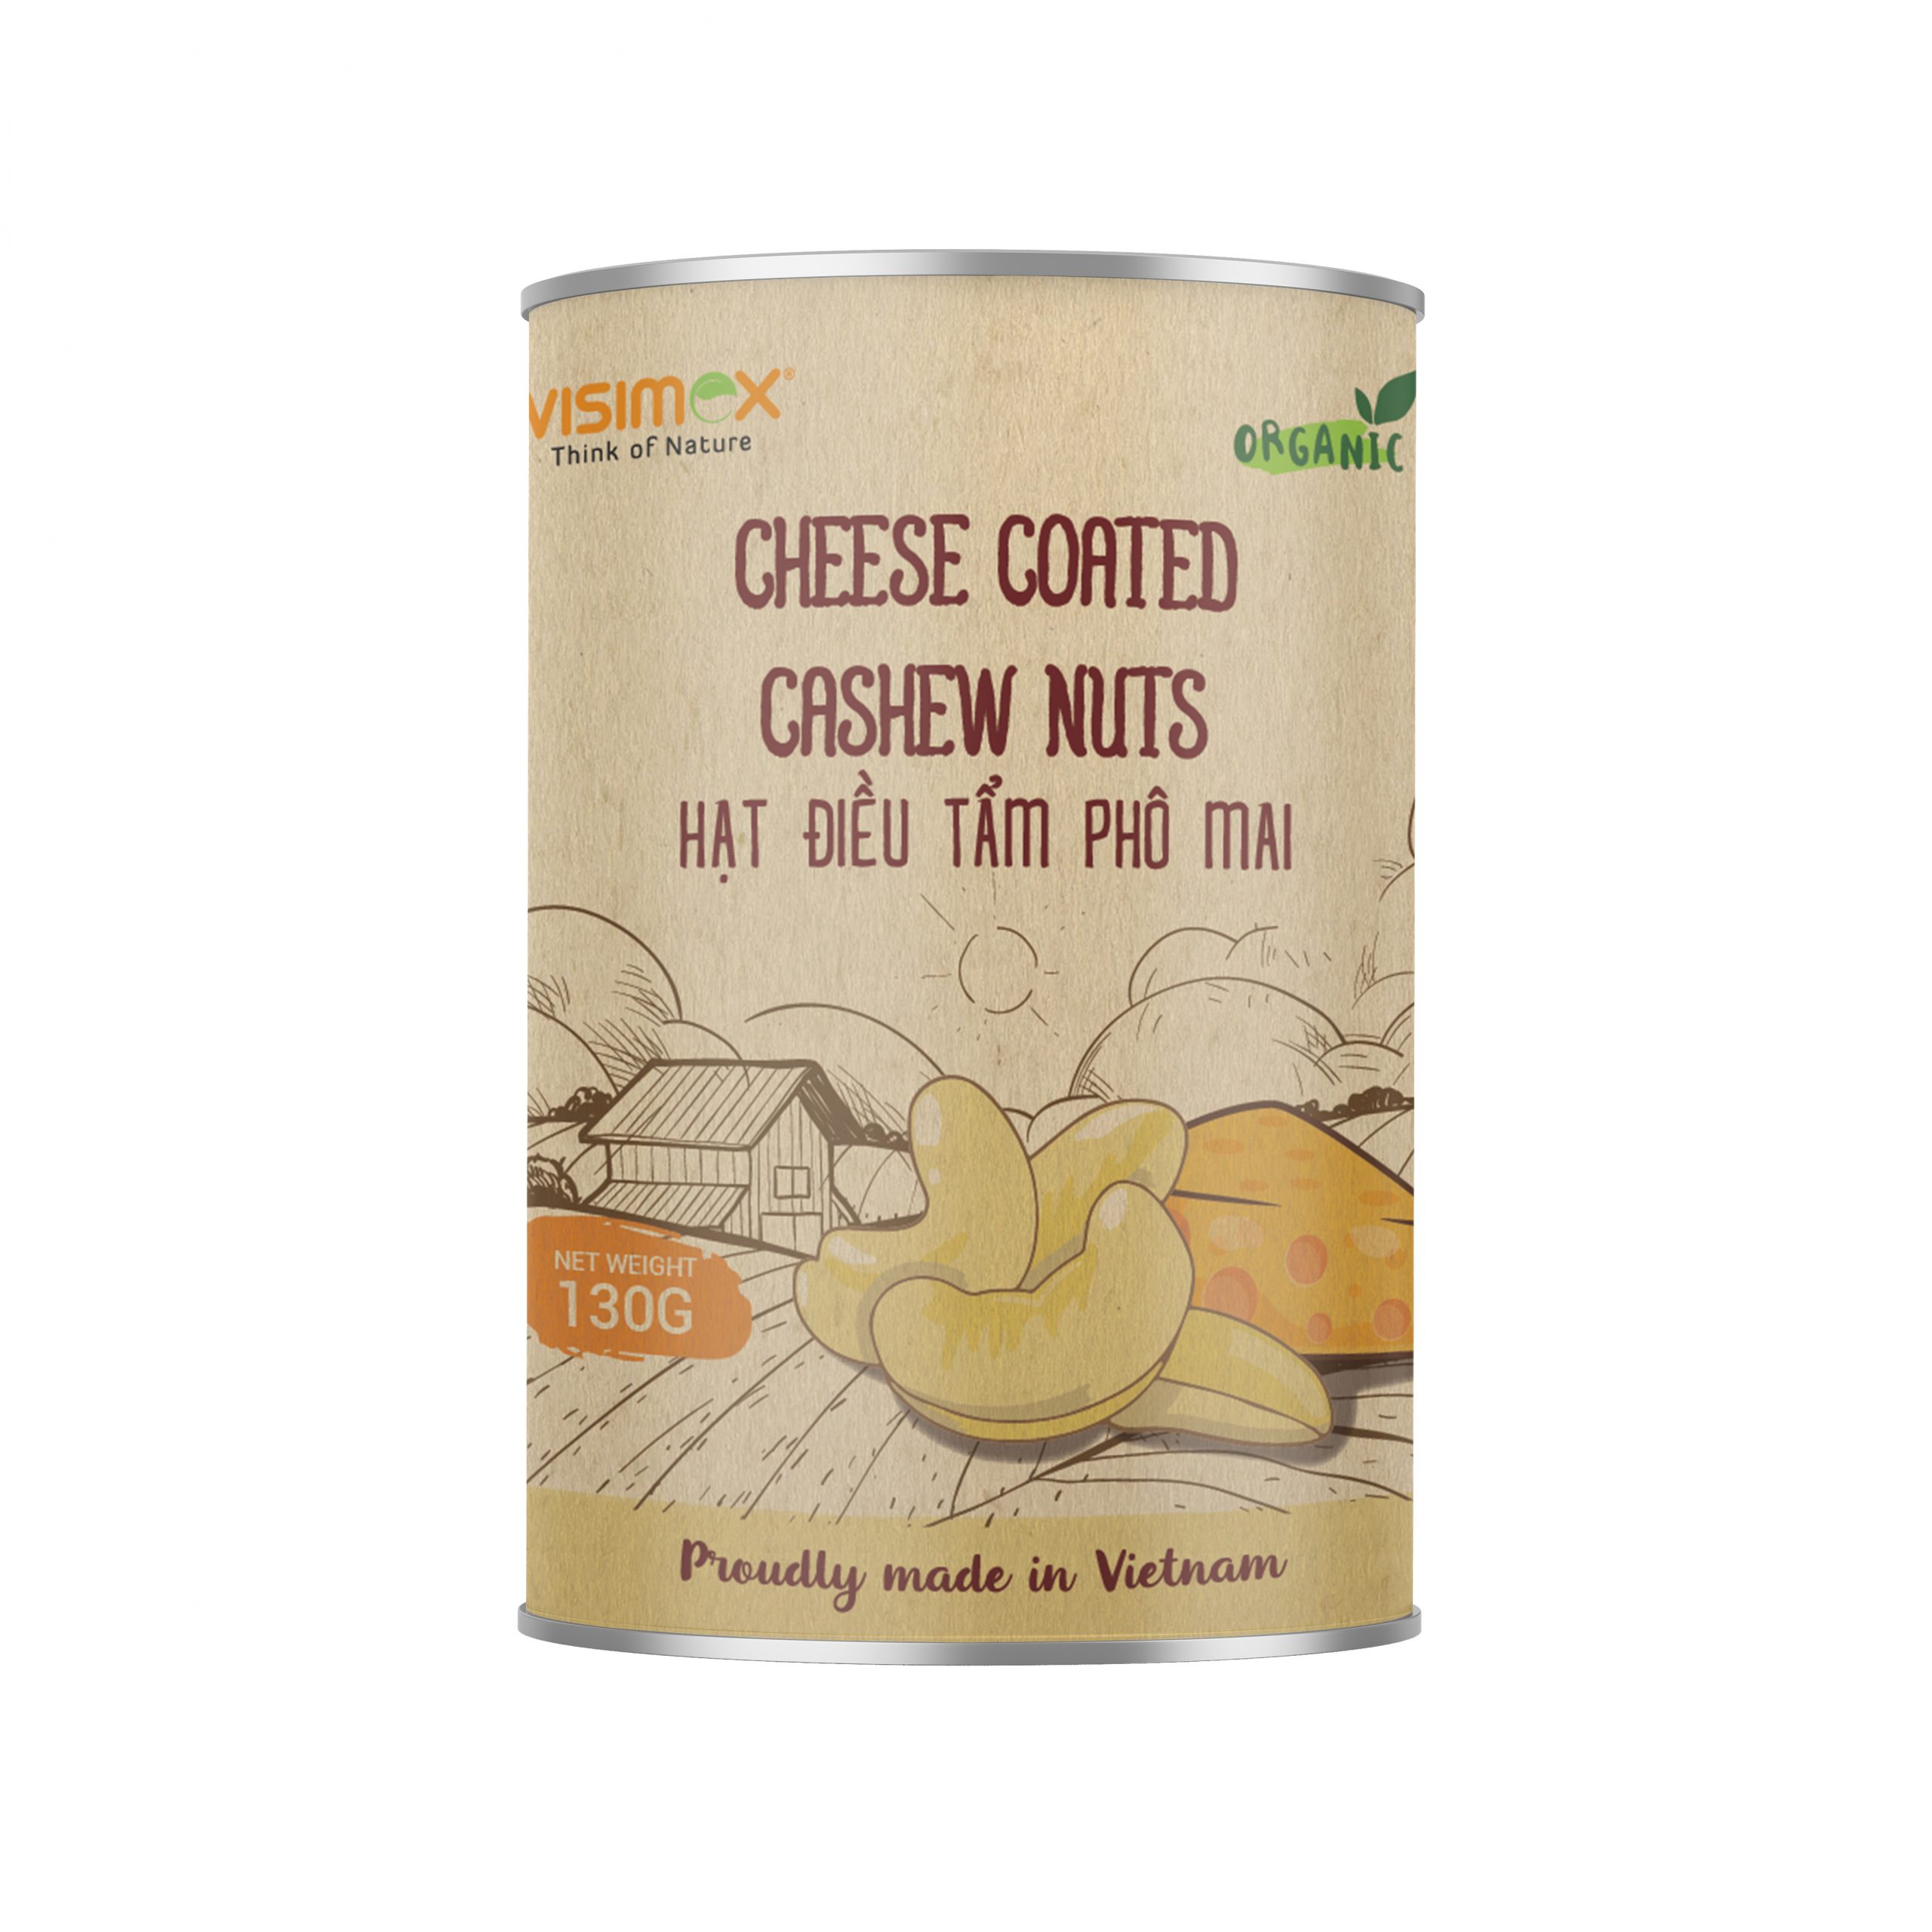 Cheese coated cashew nuts